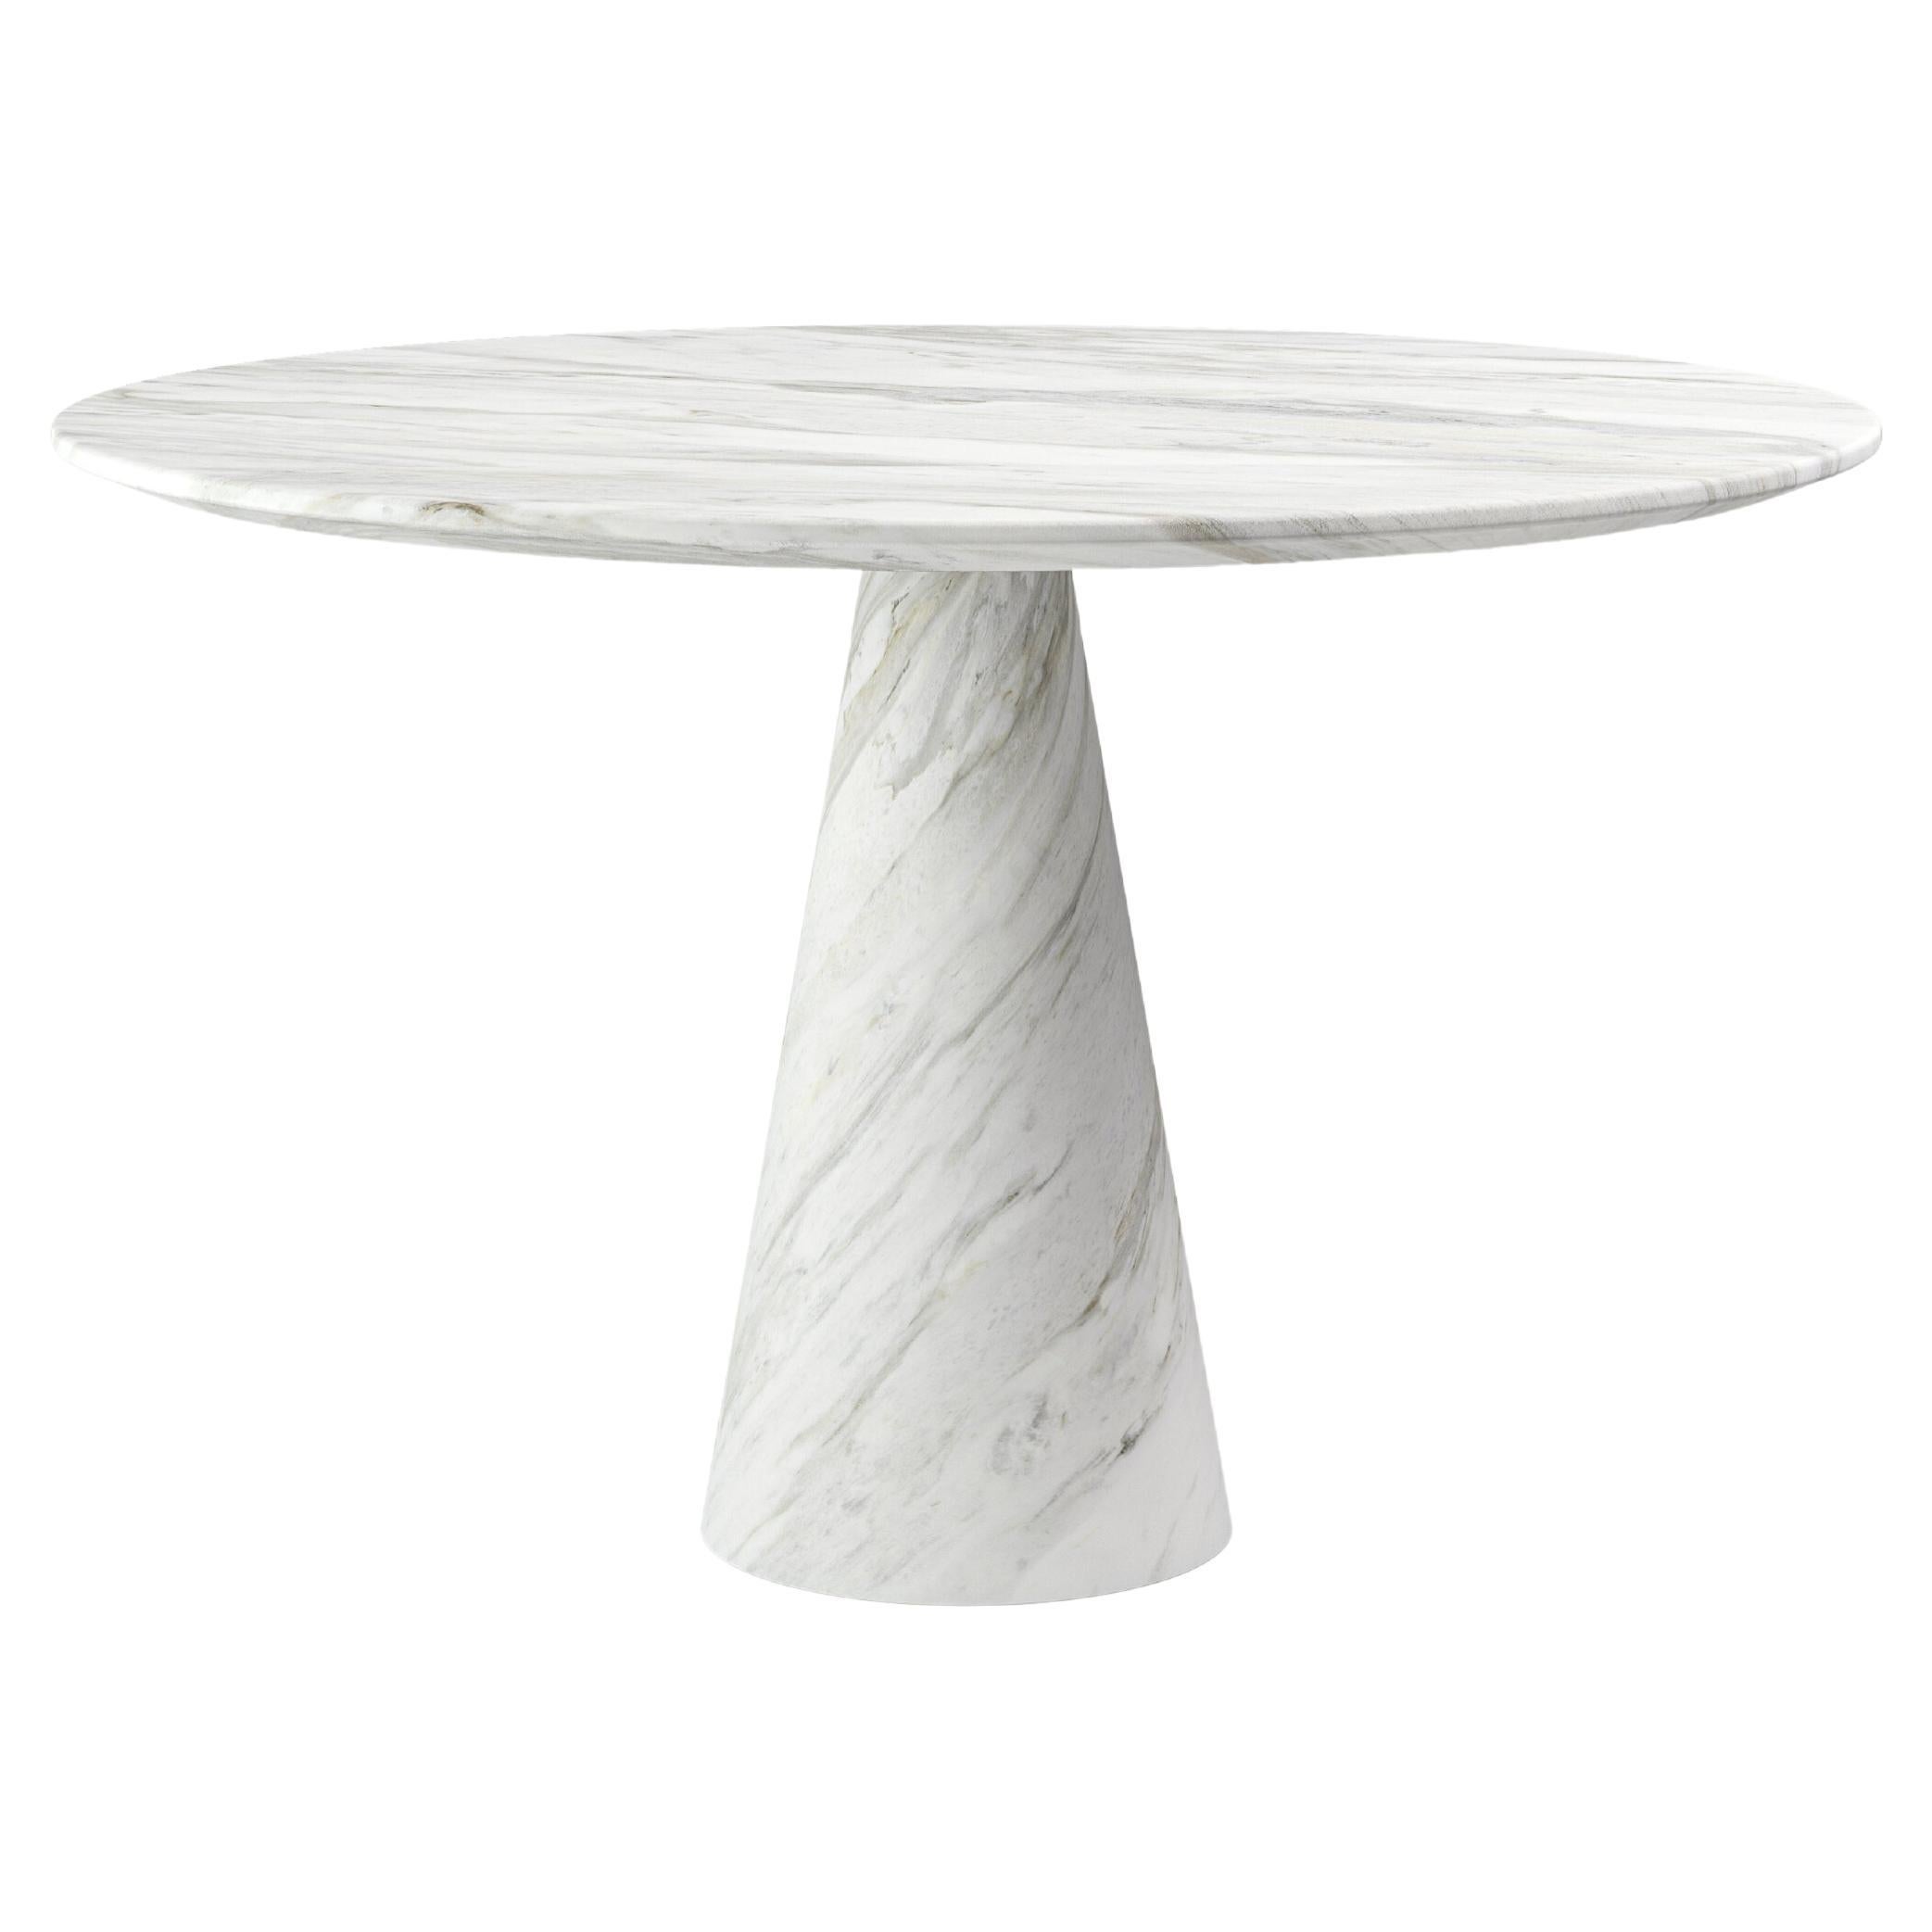 FORM(LA) Cono Round Dining Table 60”L x 60"W x 30”H Volakas White Marble For Sale